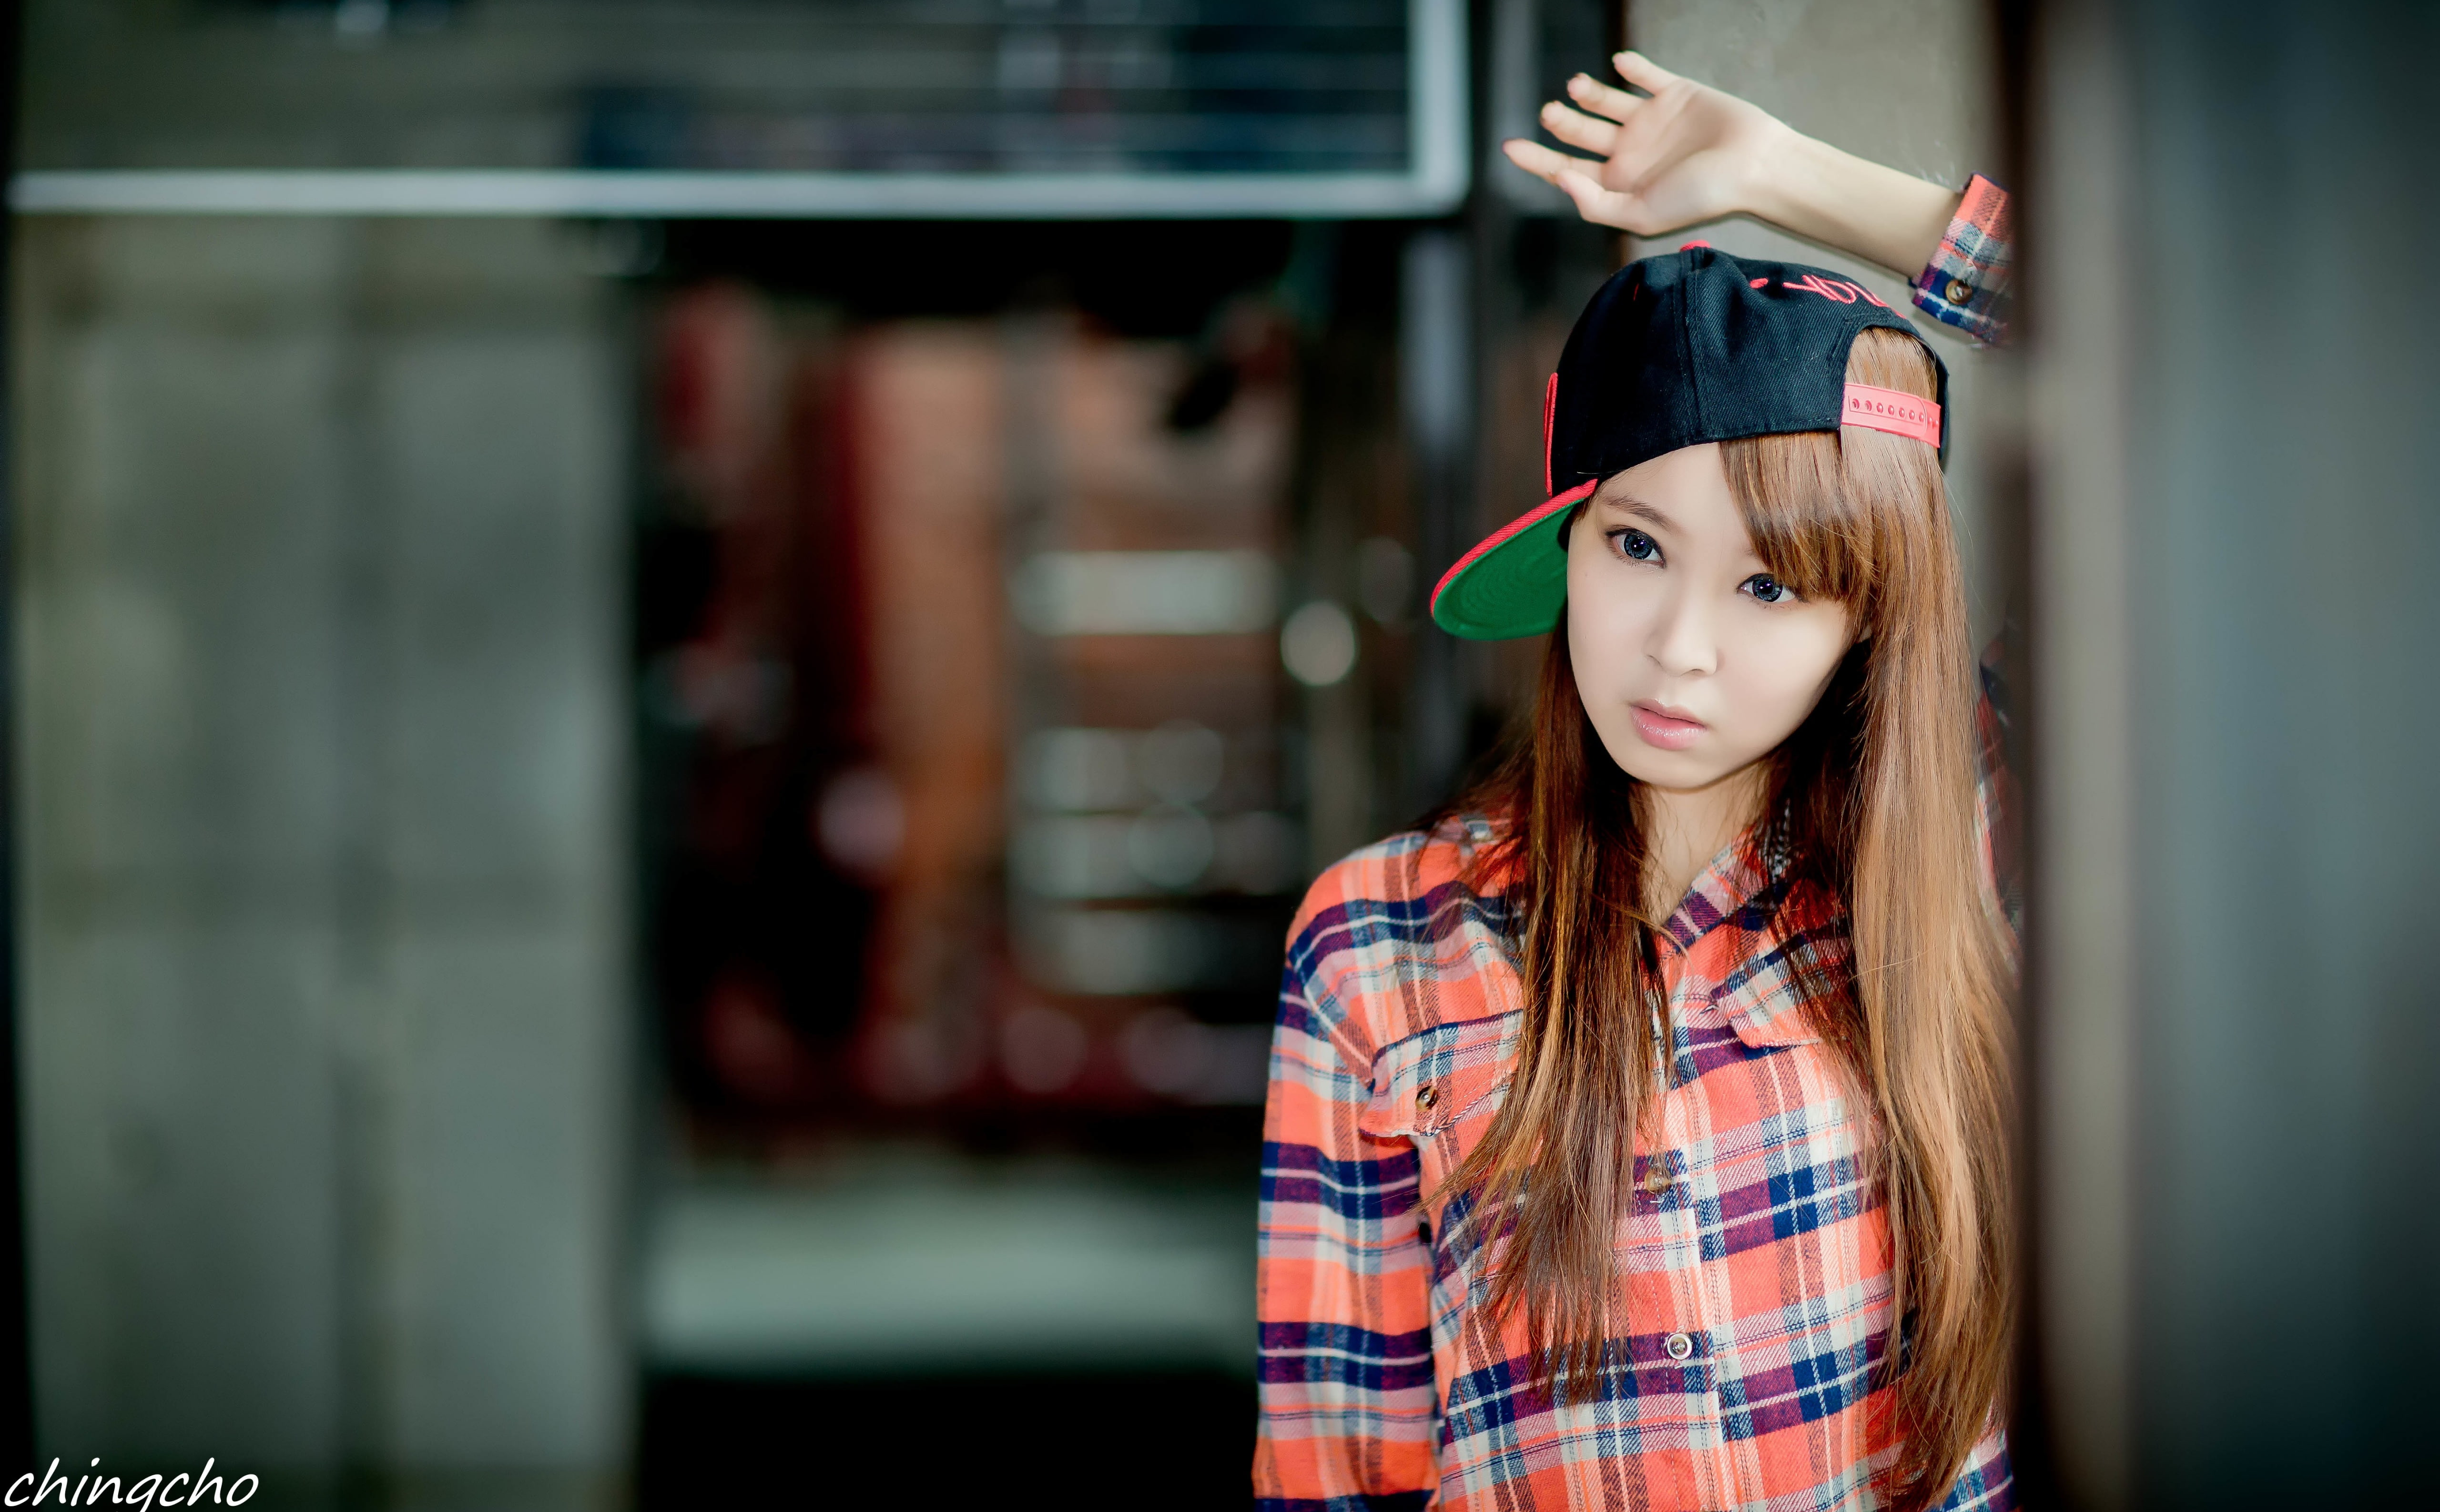 Asian Girl, Checkered Shirt and Cap, Girls, City, Style, People